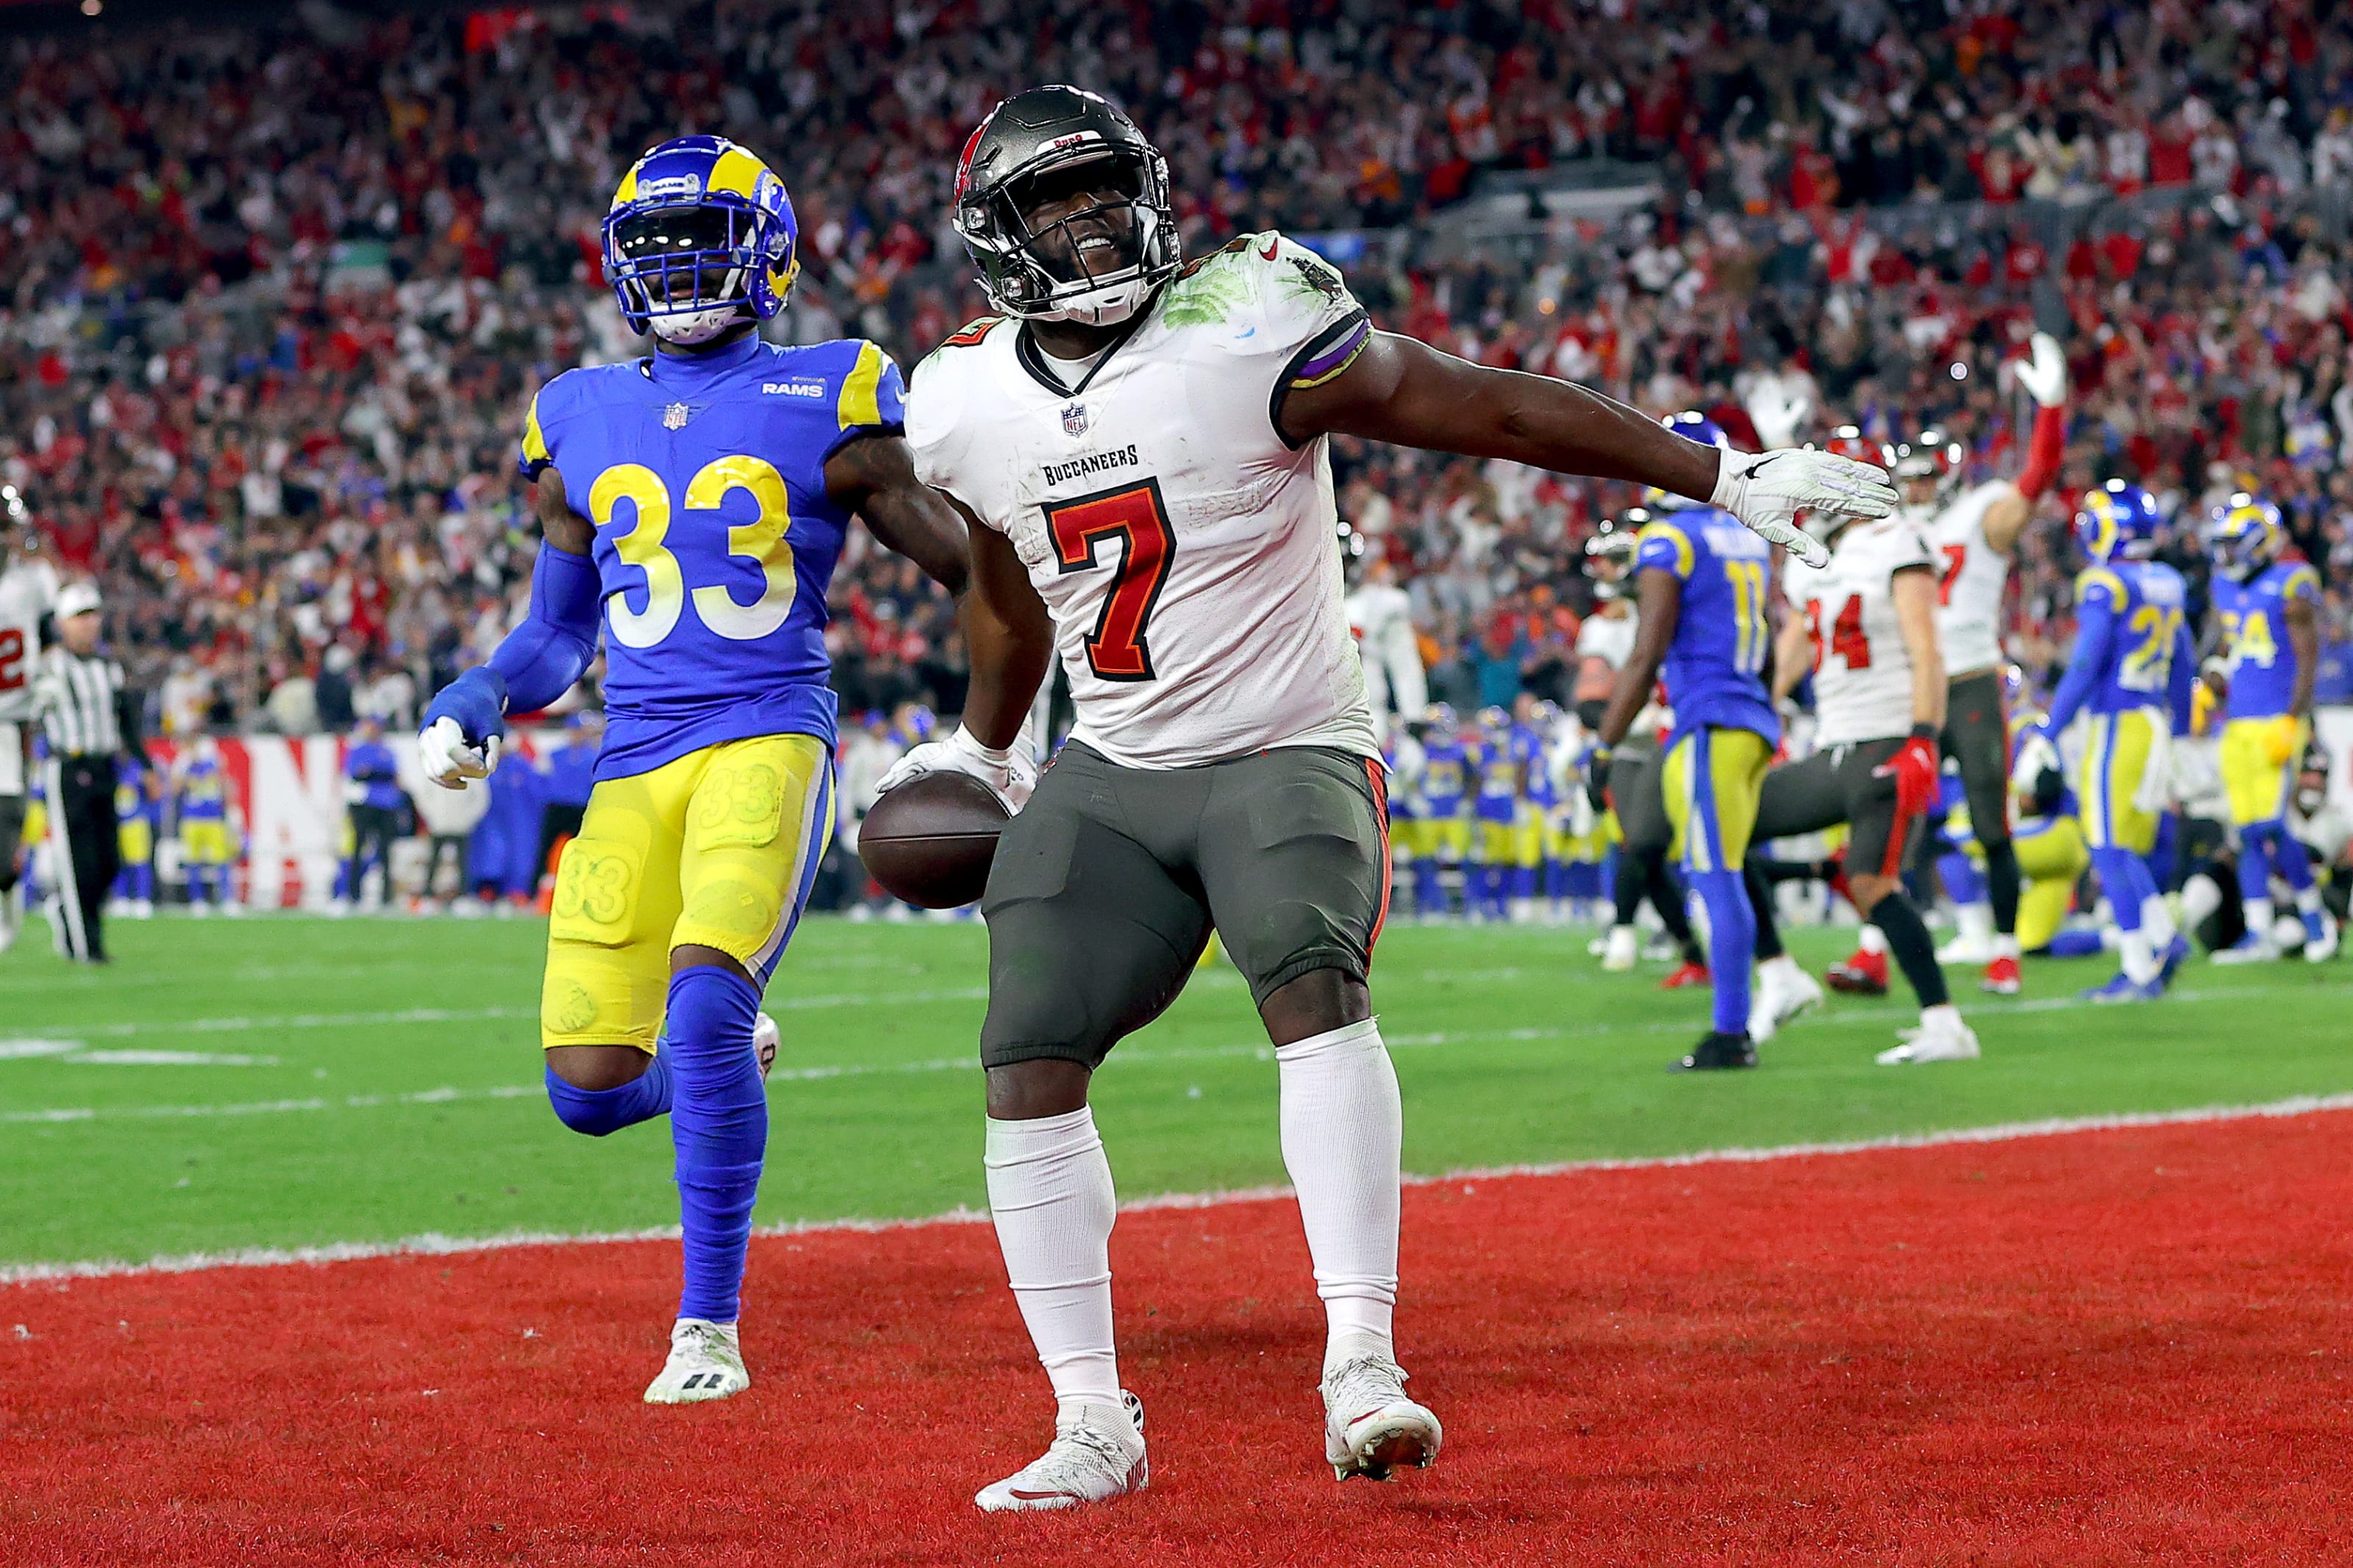 3 things the Tampa Bay Buccaneers need to address in 2022